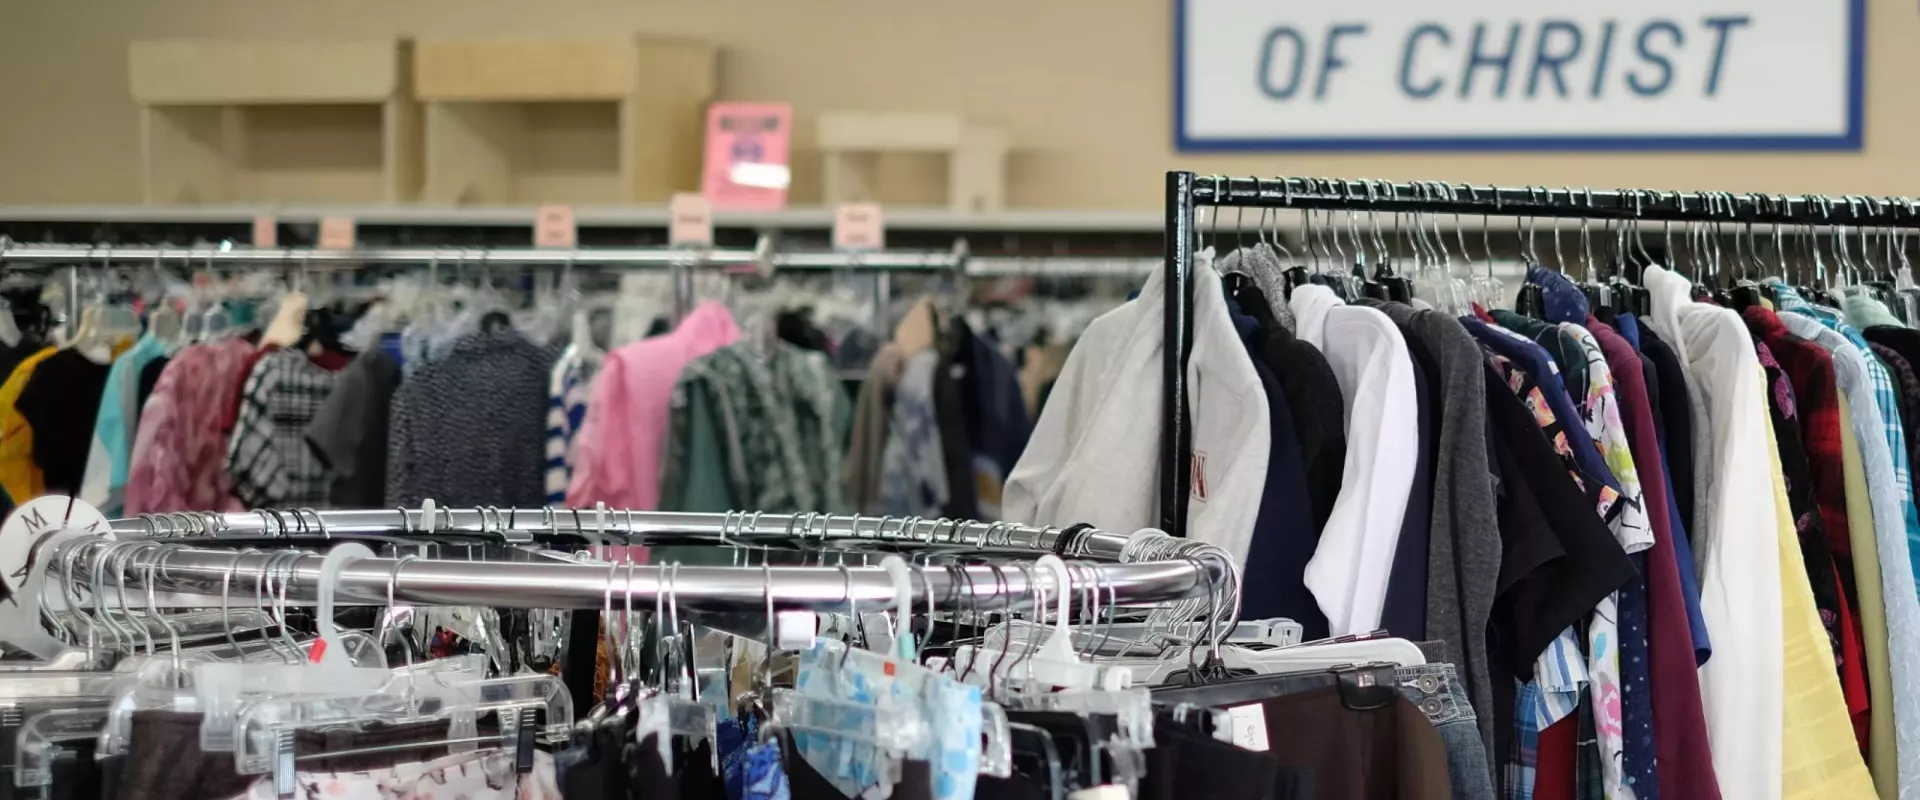 Clothes hanging on racks in the Winkler MCC Thrift shop.